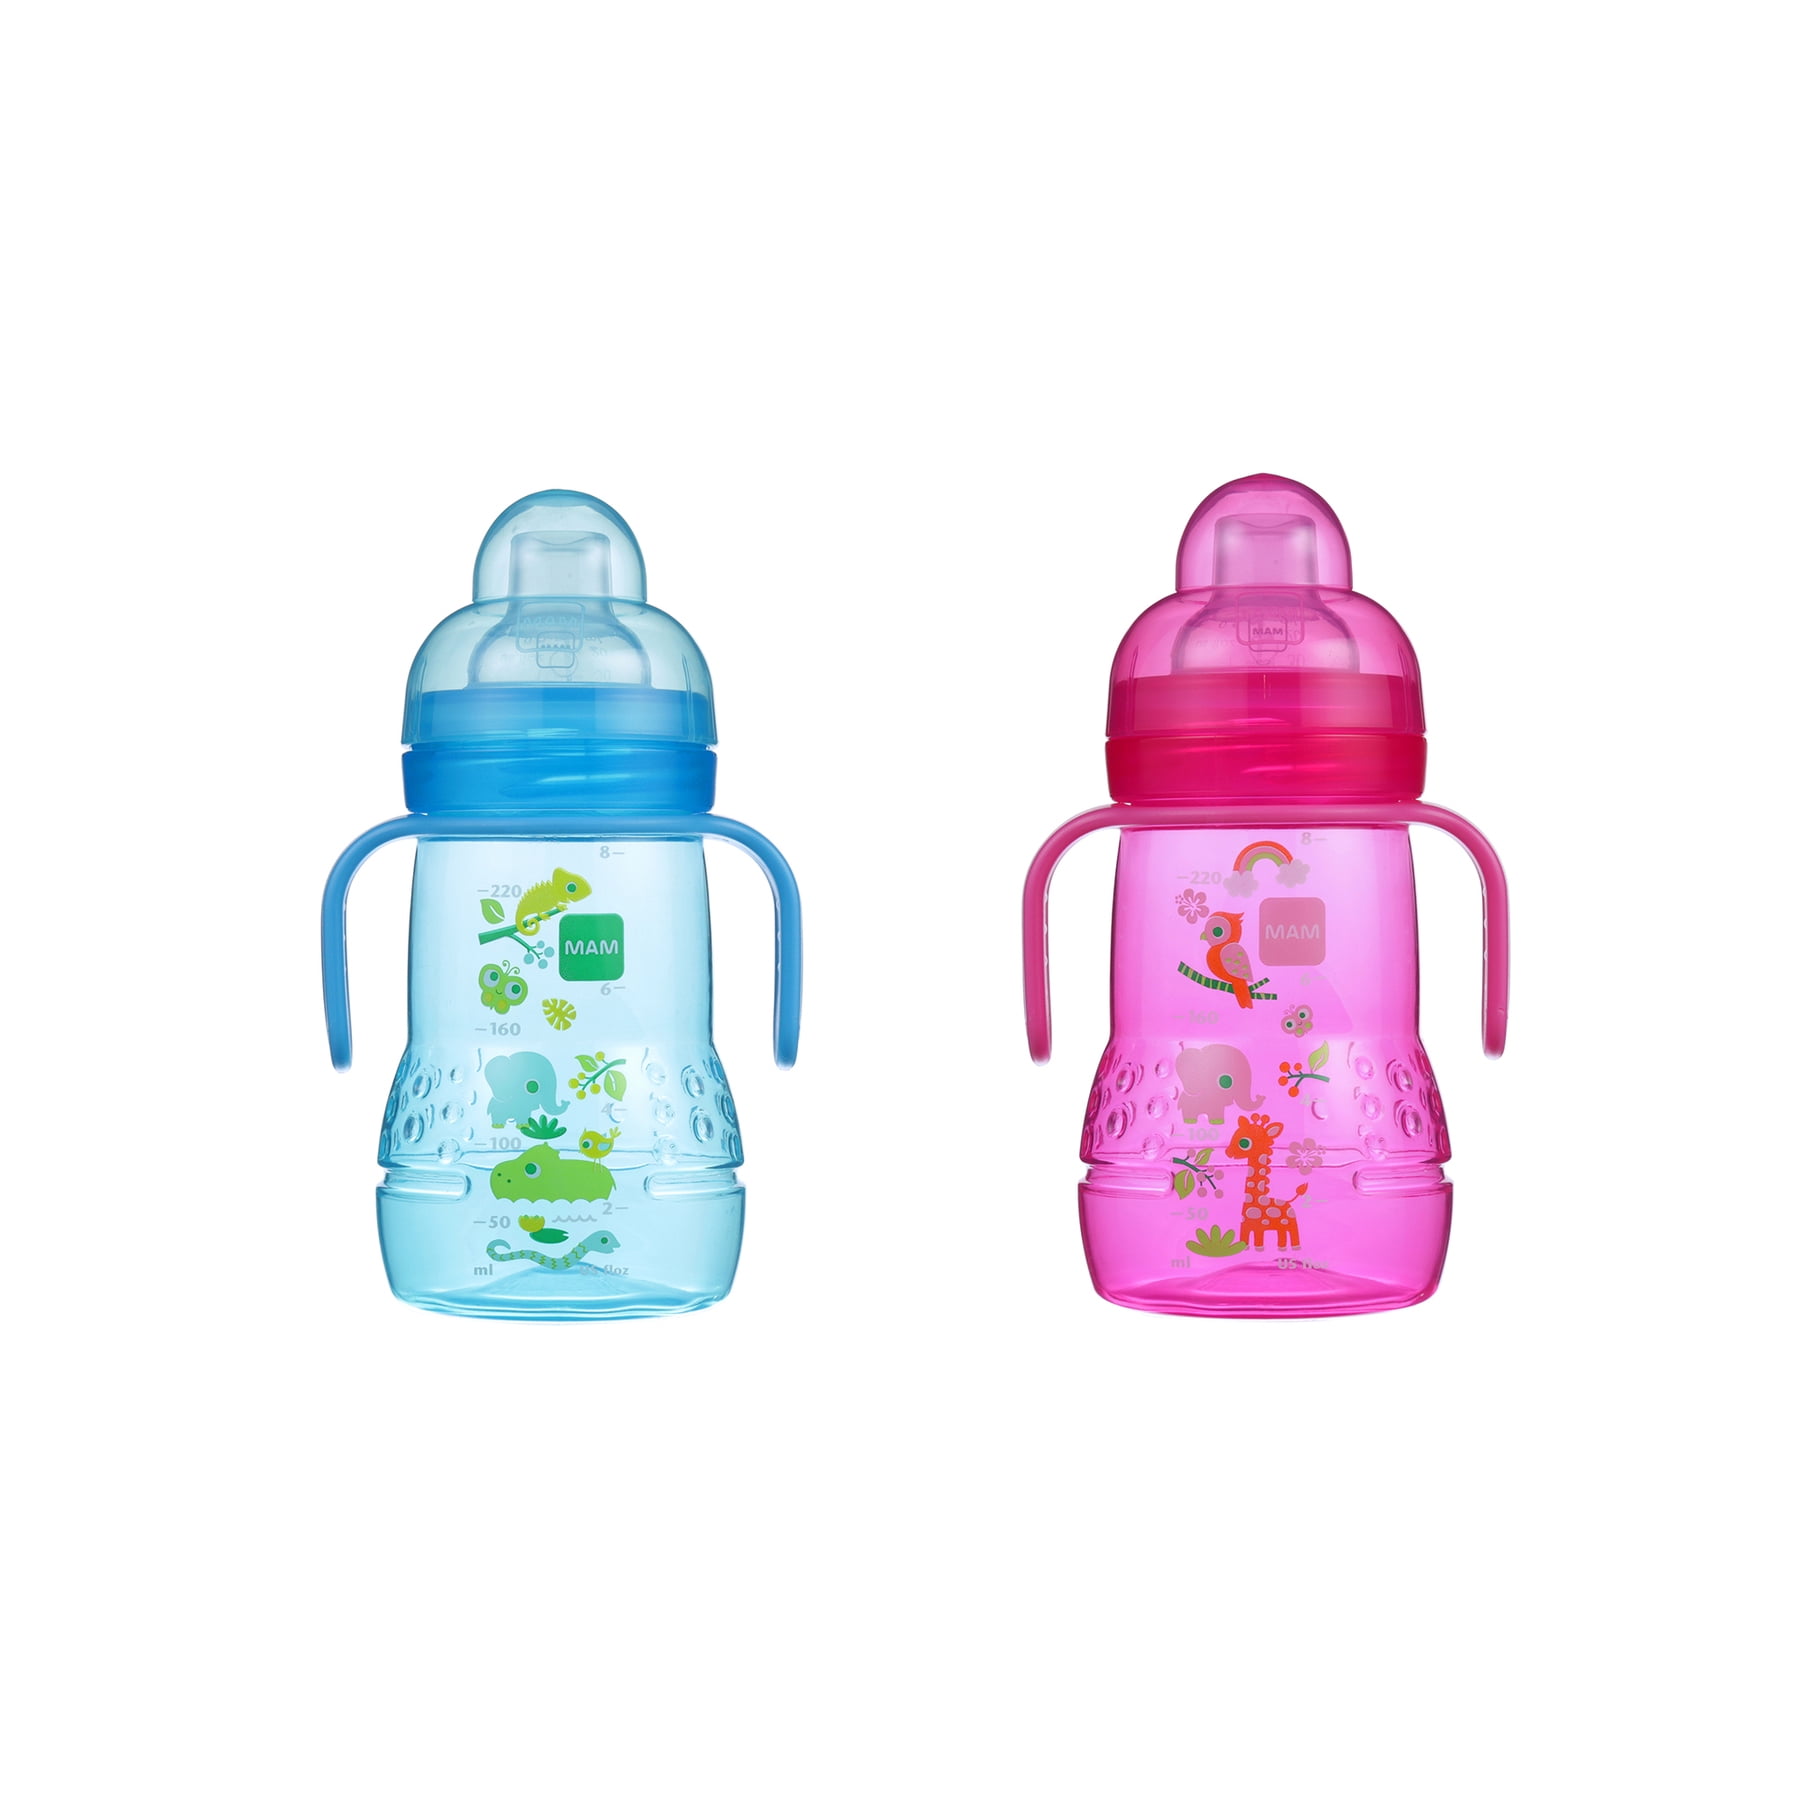 mam bottles sippy cup